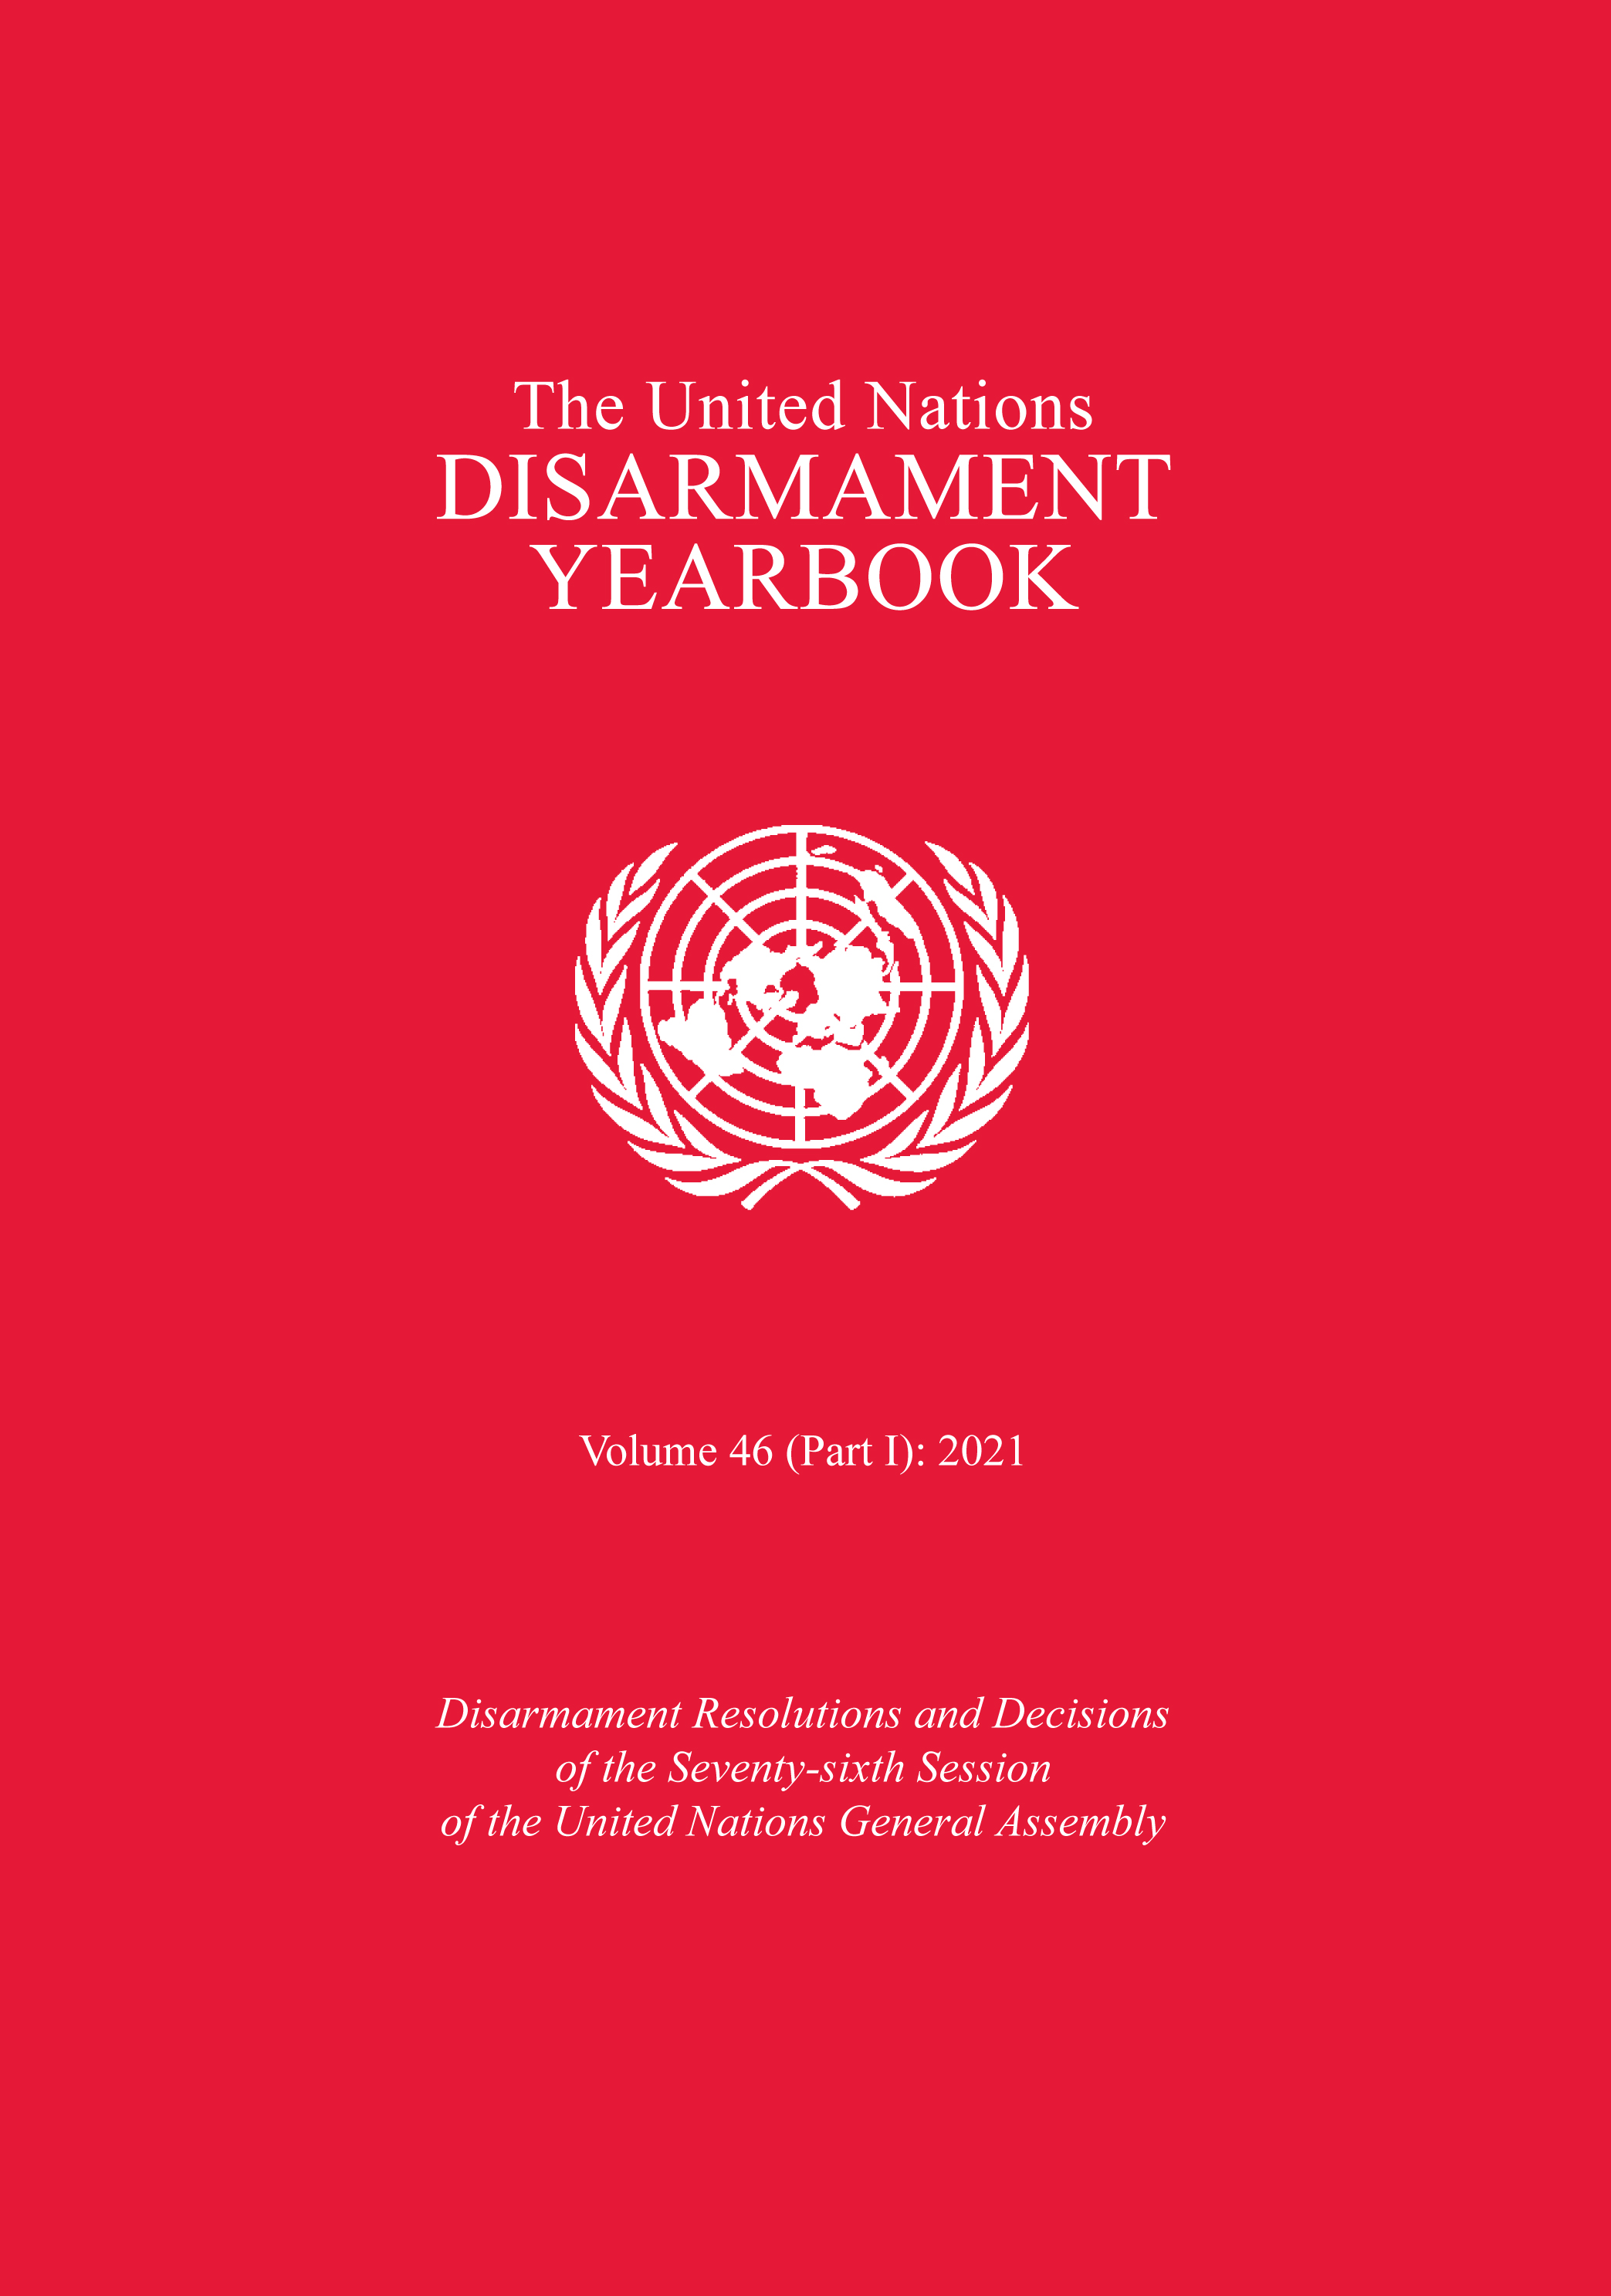 United Nations Disarmament Yearbook 2021: Part I